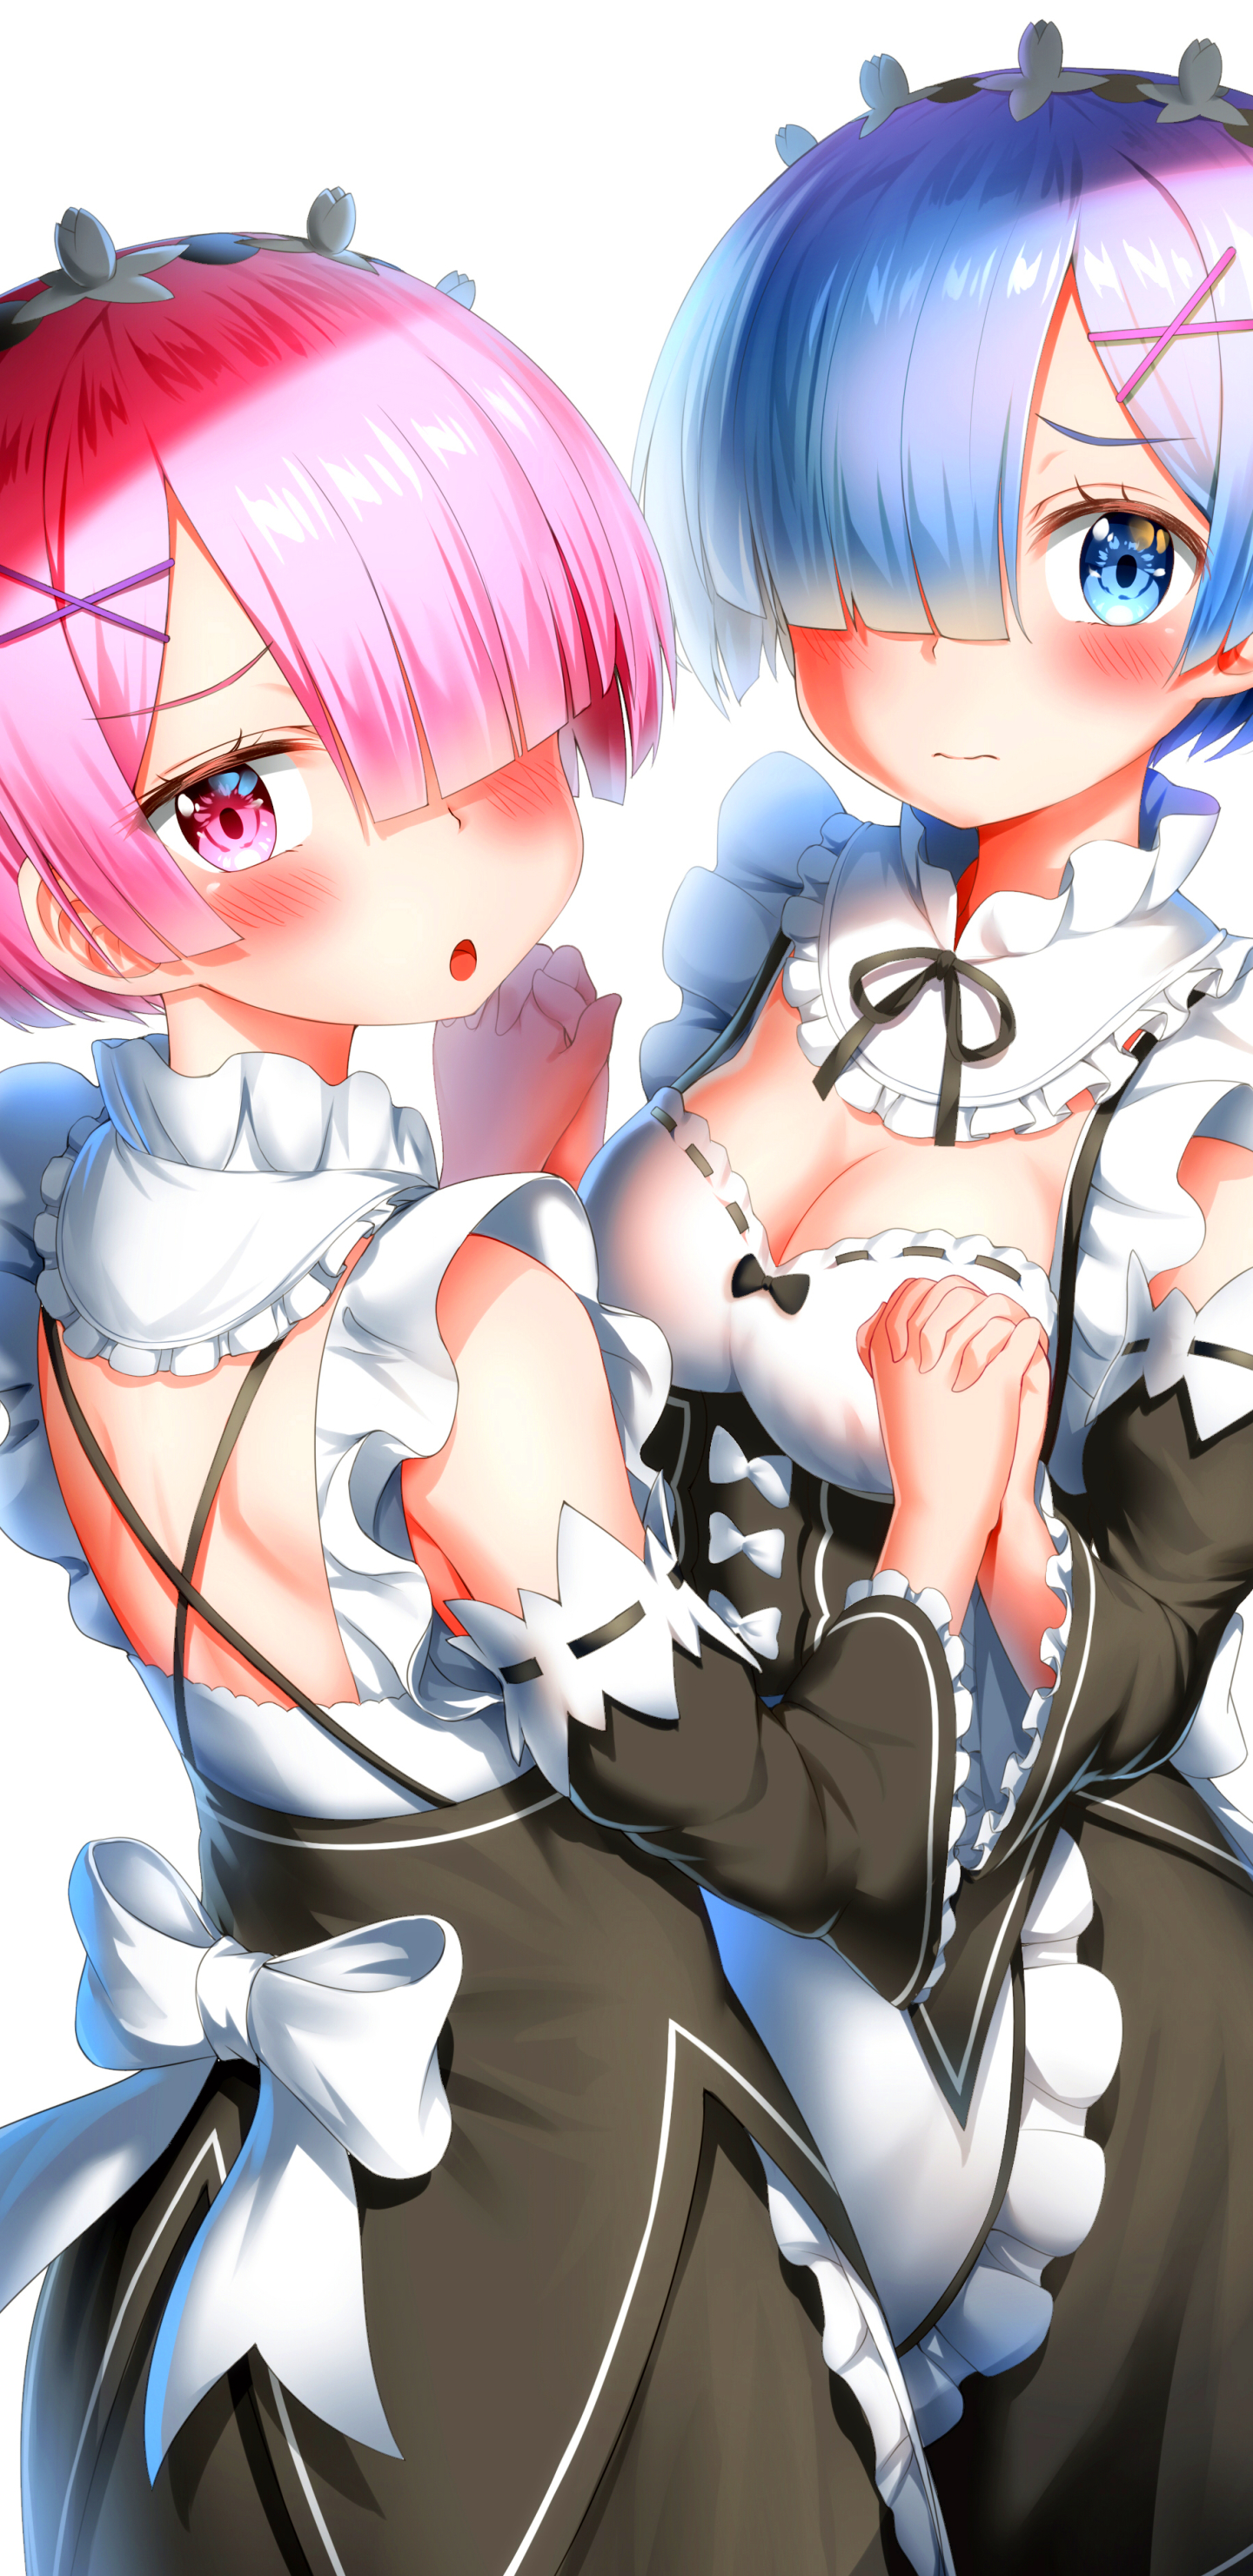 Anime Re:ZERO -Starting Life in Another World- Phone Wallpaper by ねでぃあ